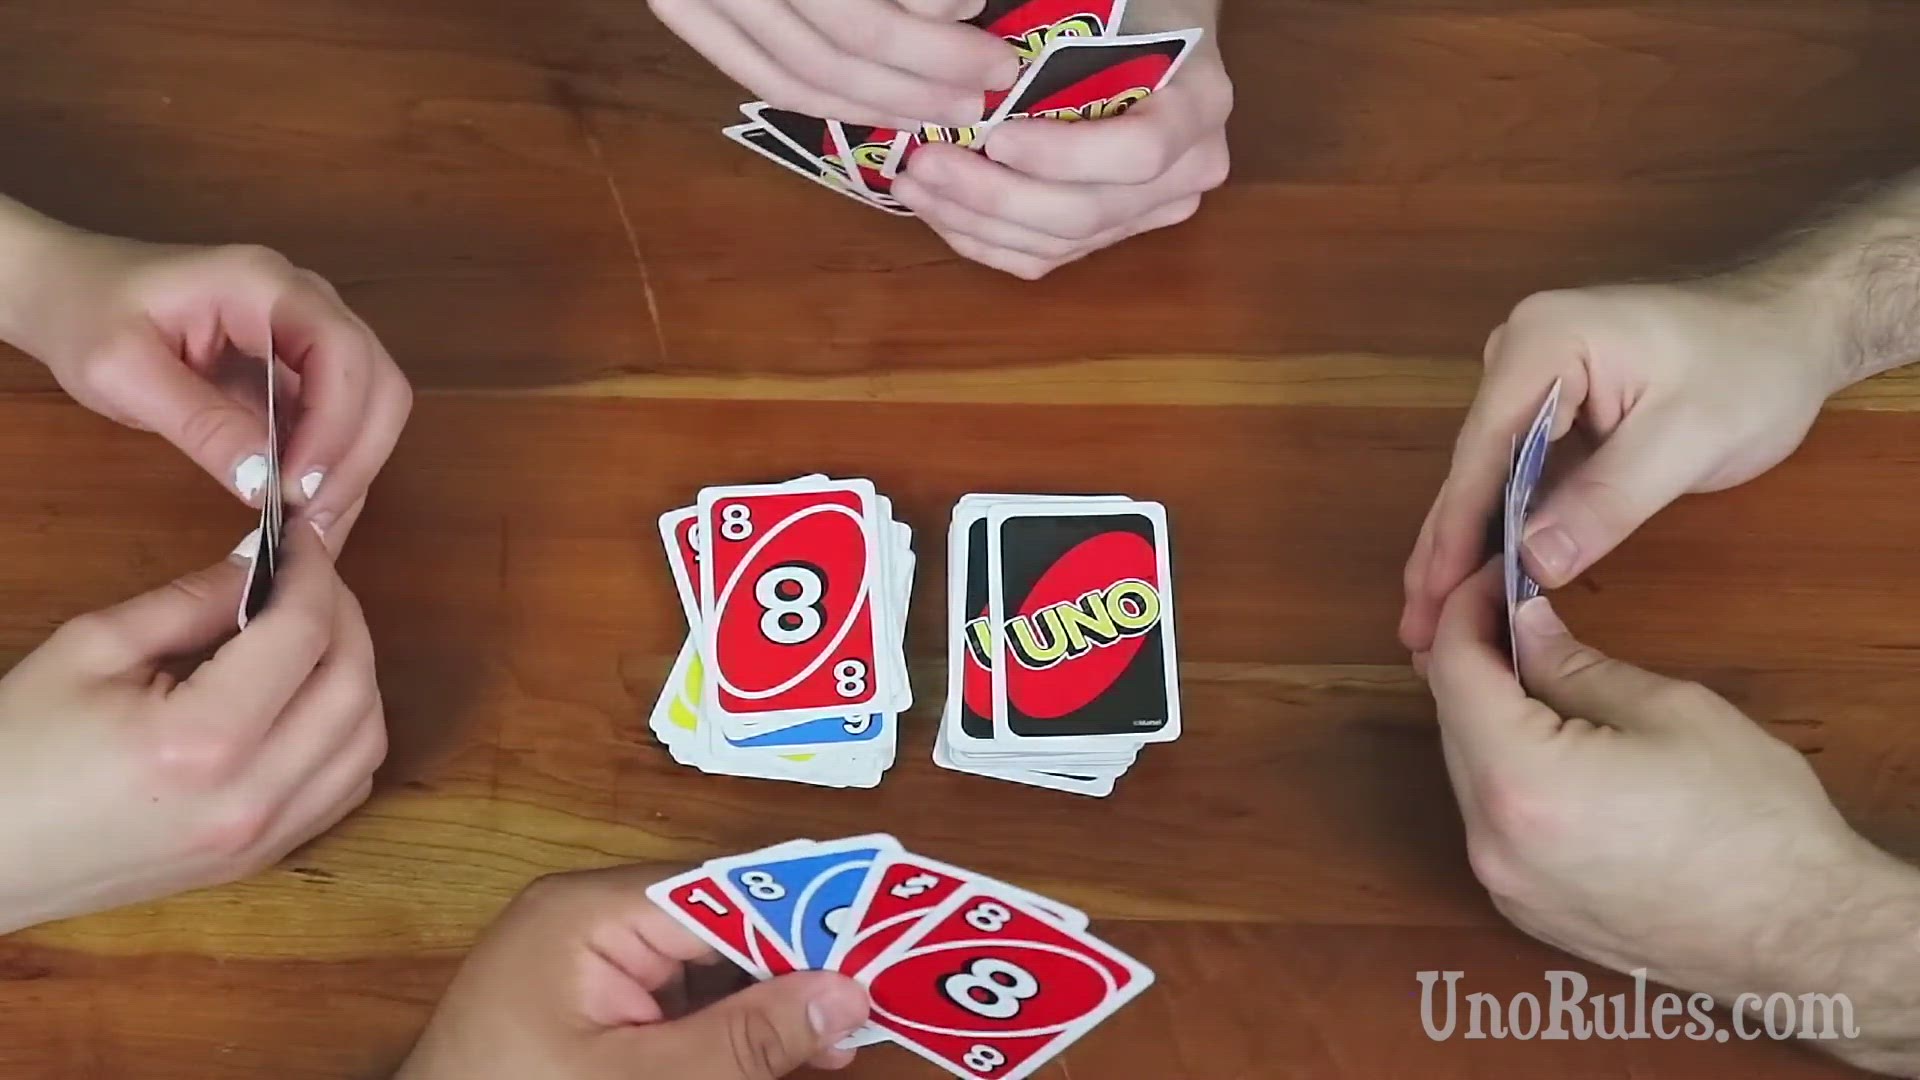 UNO Flip! Double Sided Card Game For 2-10 Players Ages 7Y+